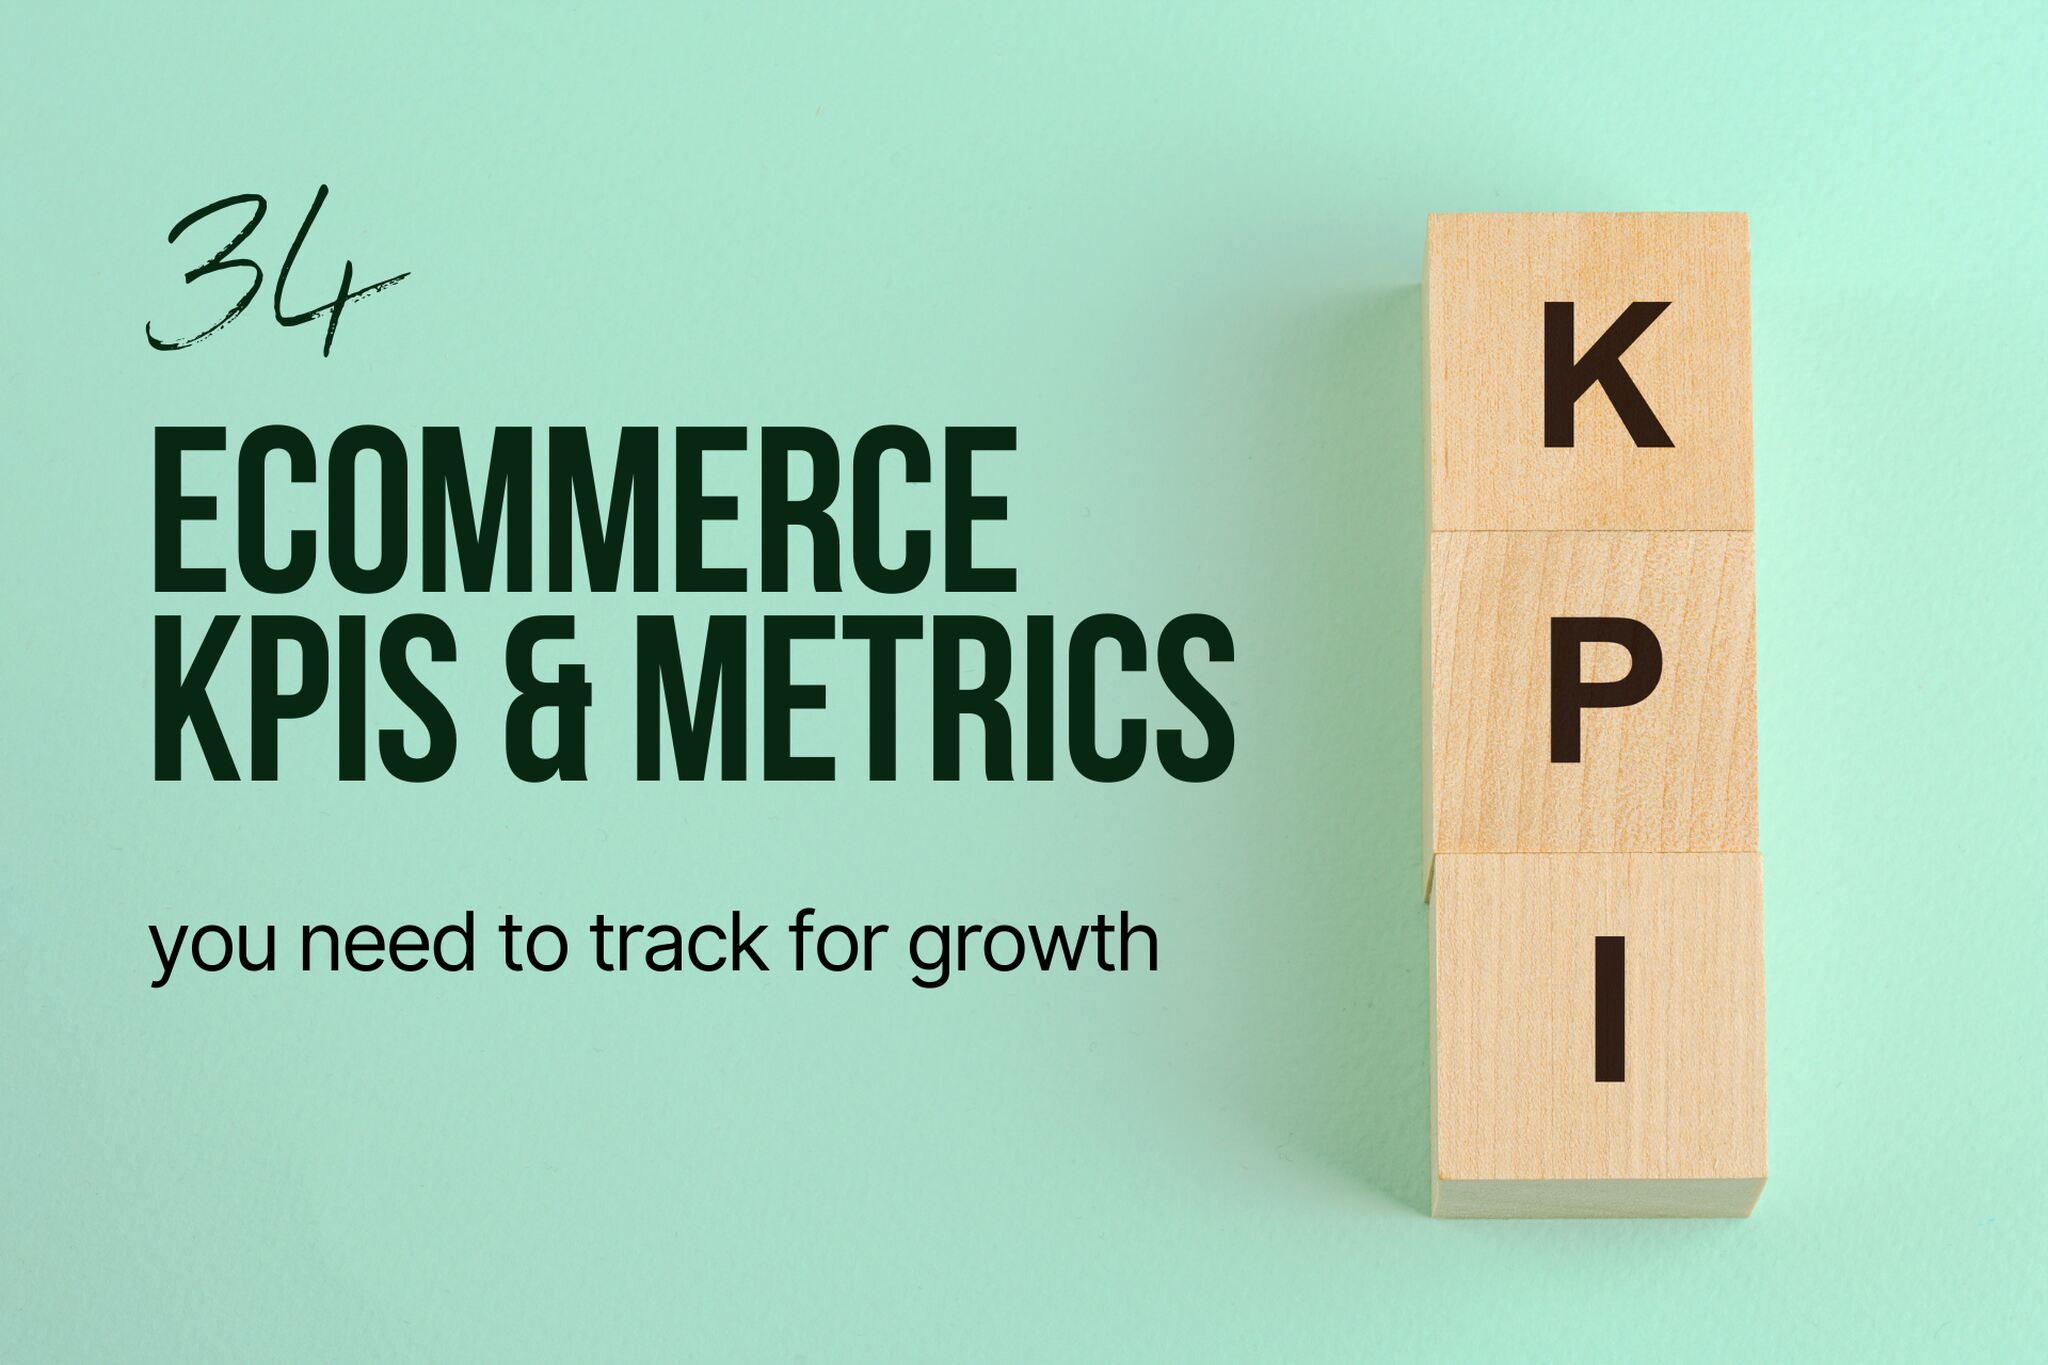 34 Ecommerce KPIs & Metrics You Need to Track for Growth